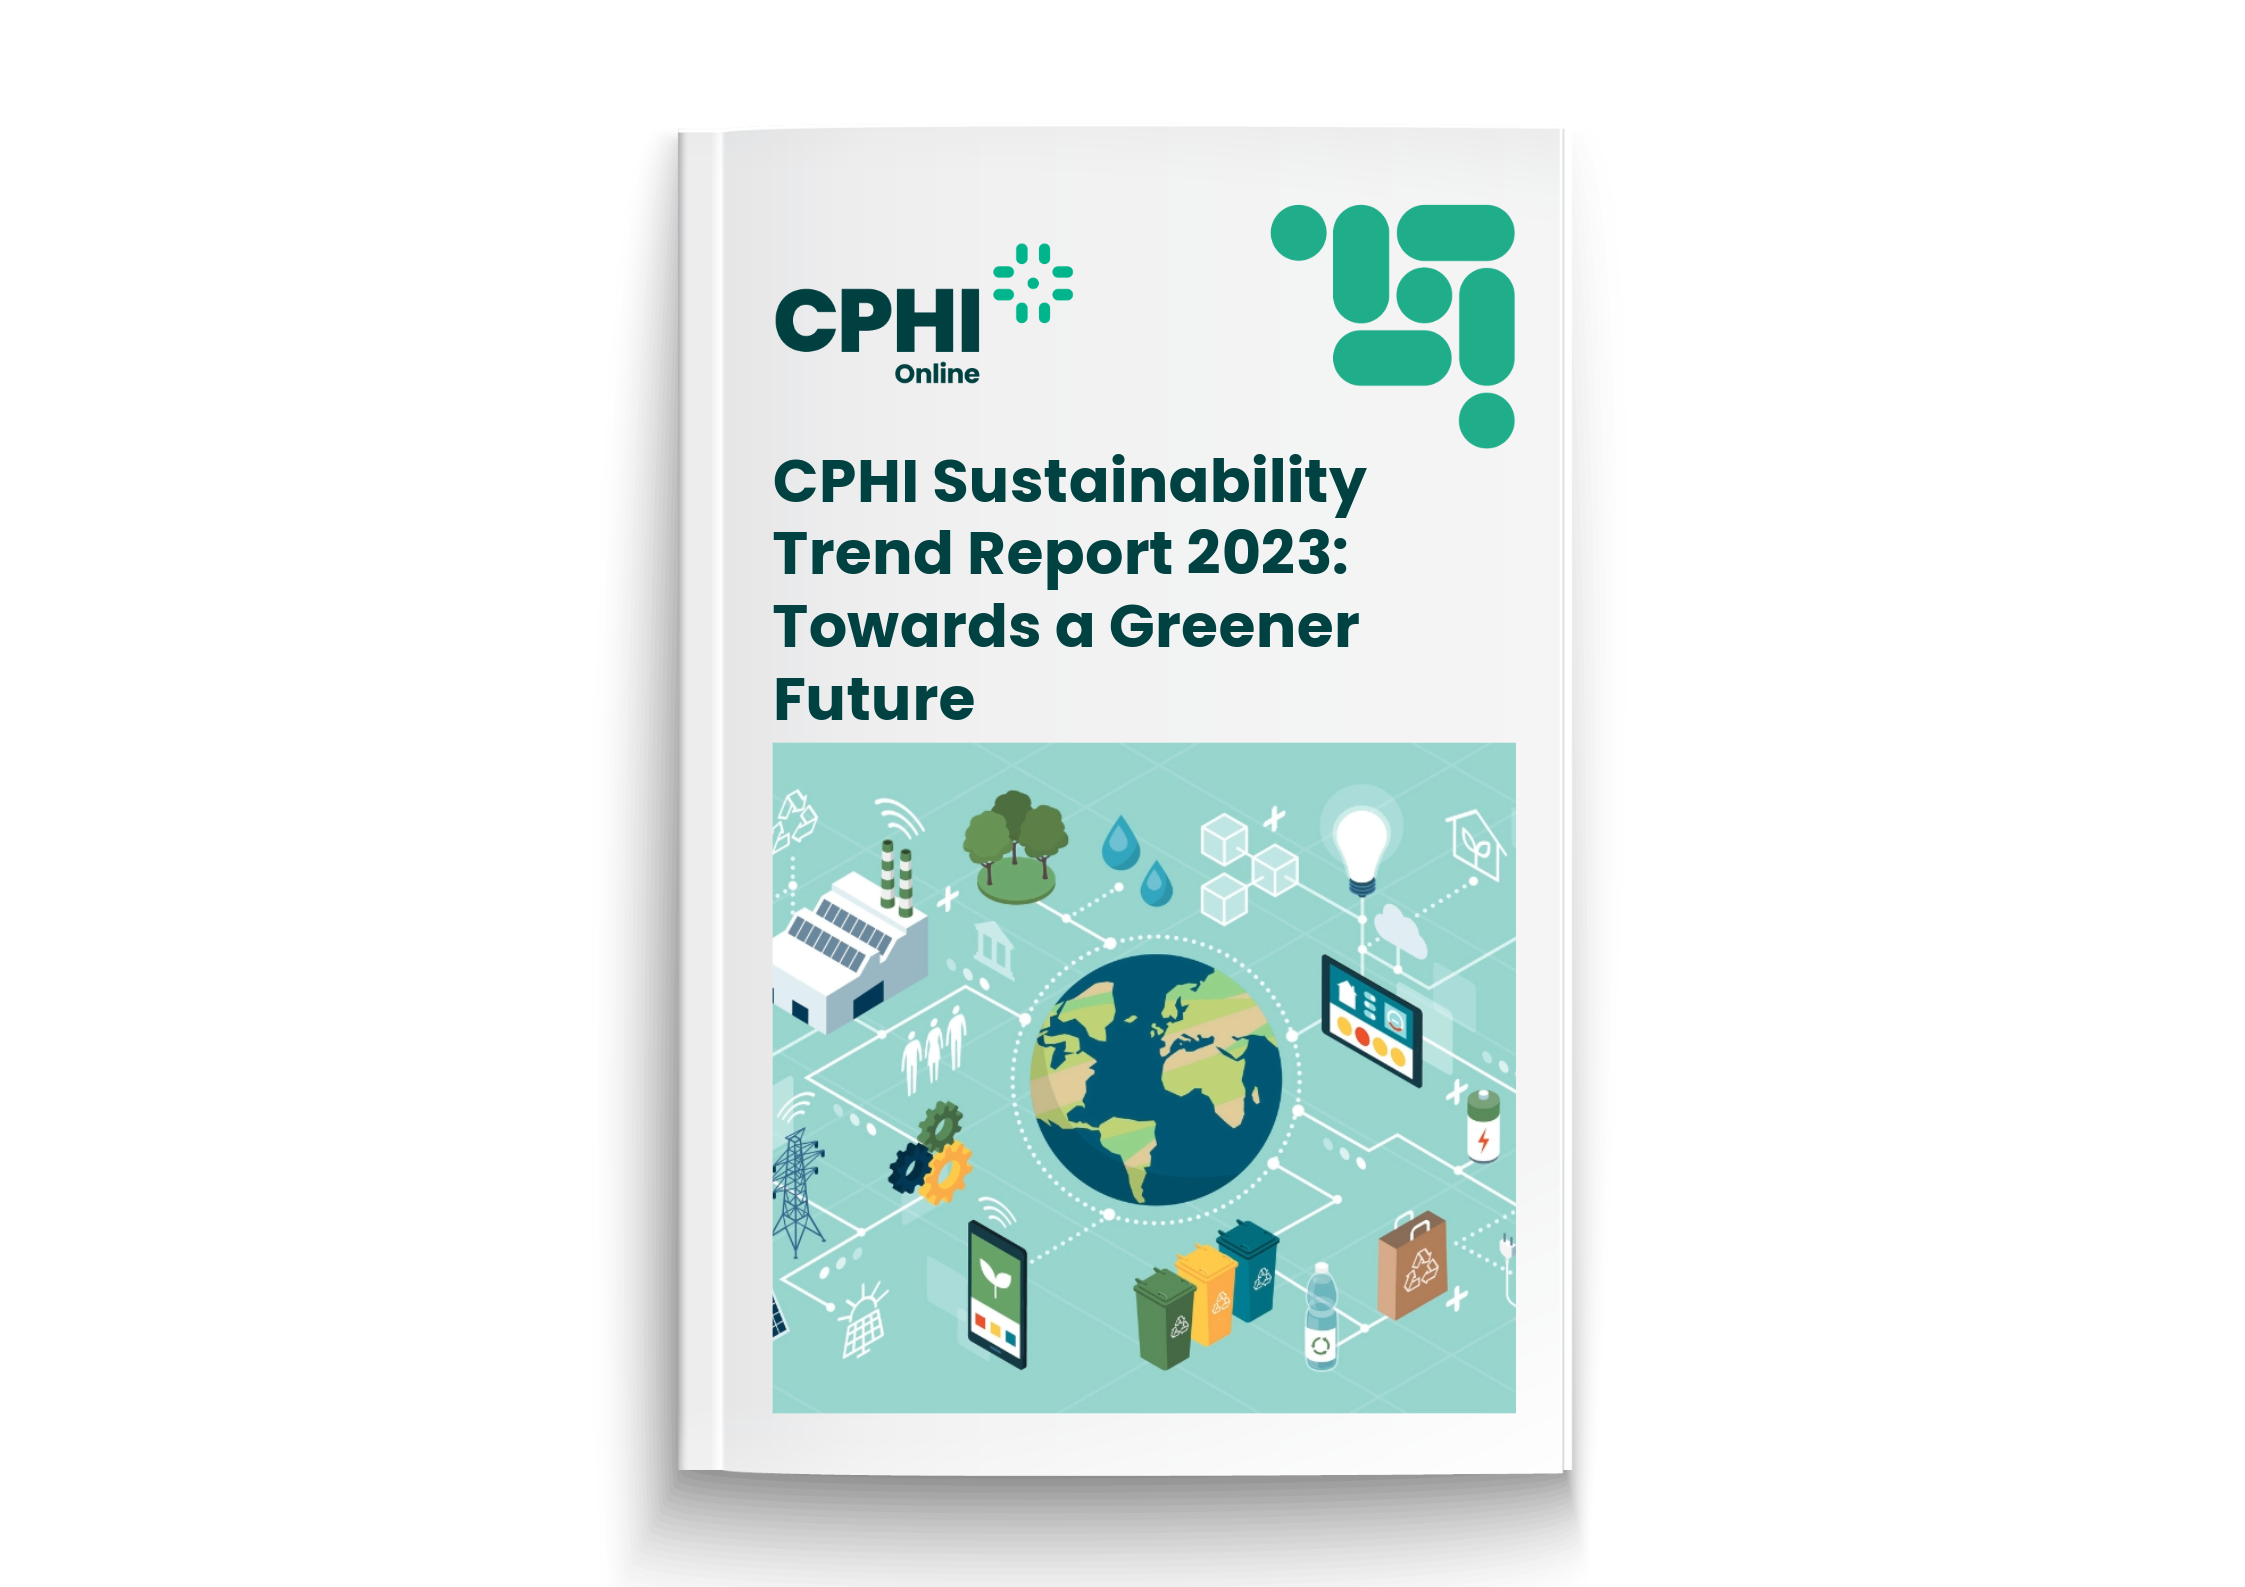 CPHI Sustainability Trend Report: Towards a Greener Future